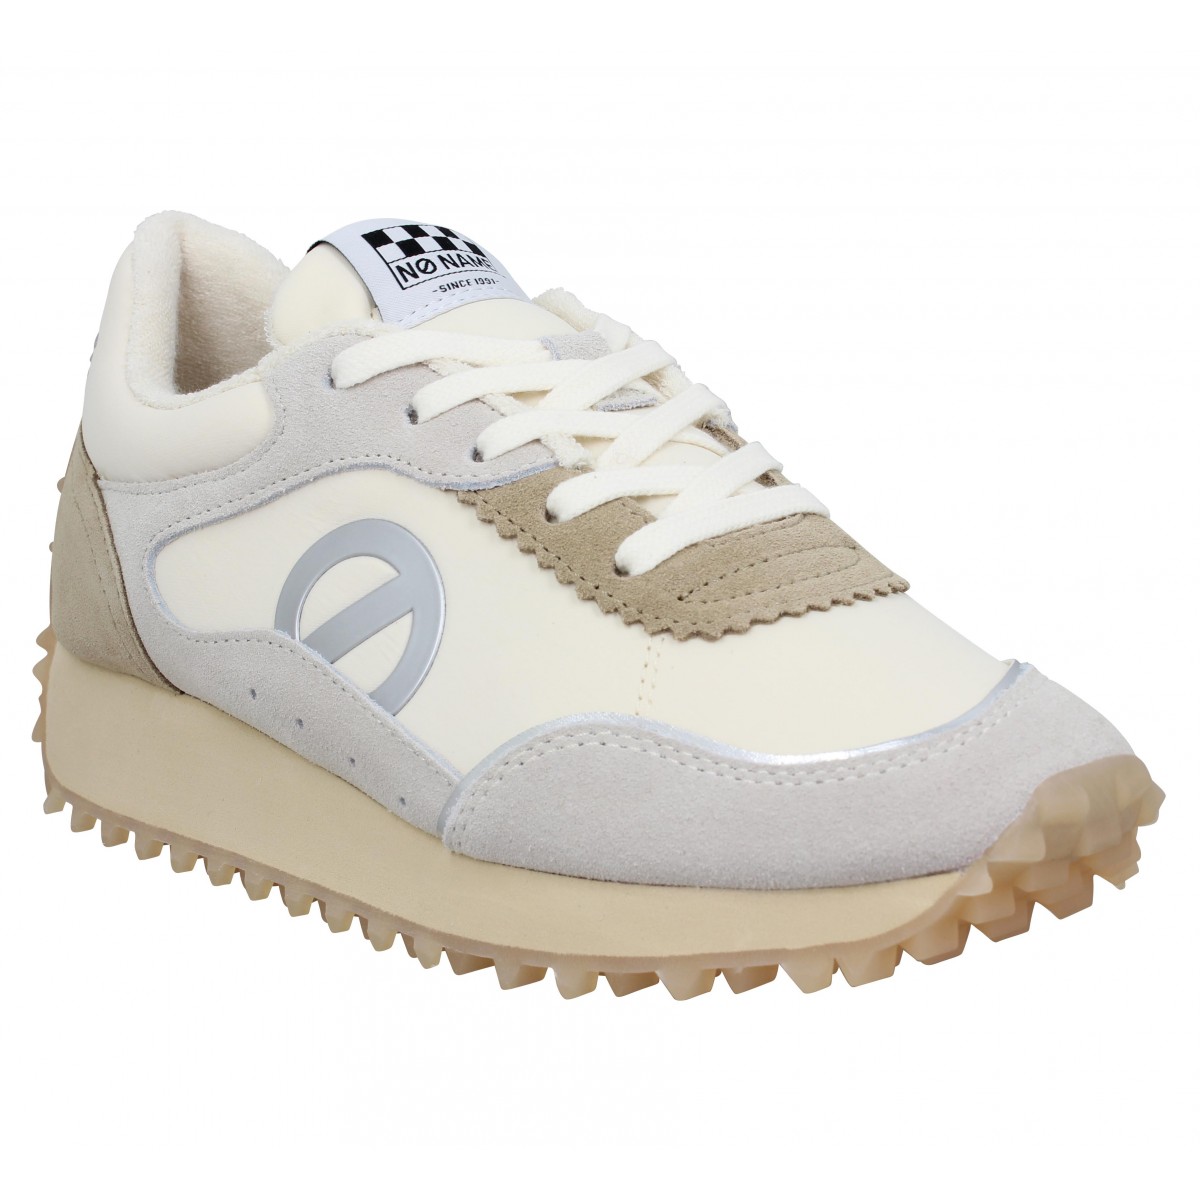 Baskets NO NAME Punky Jogger toile suede Femme Dove